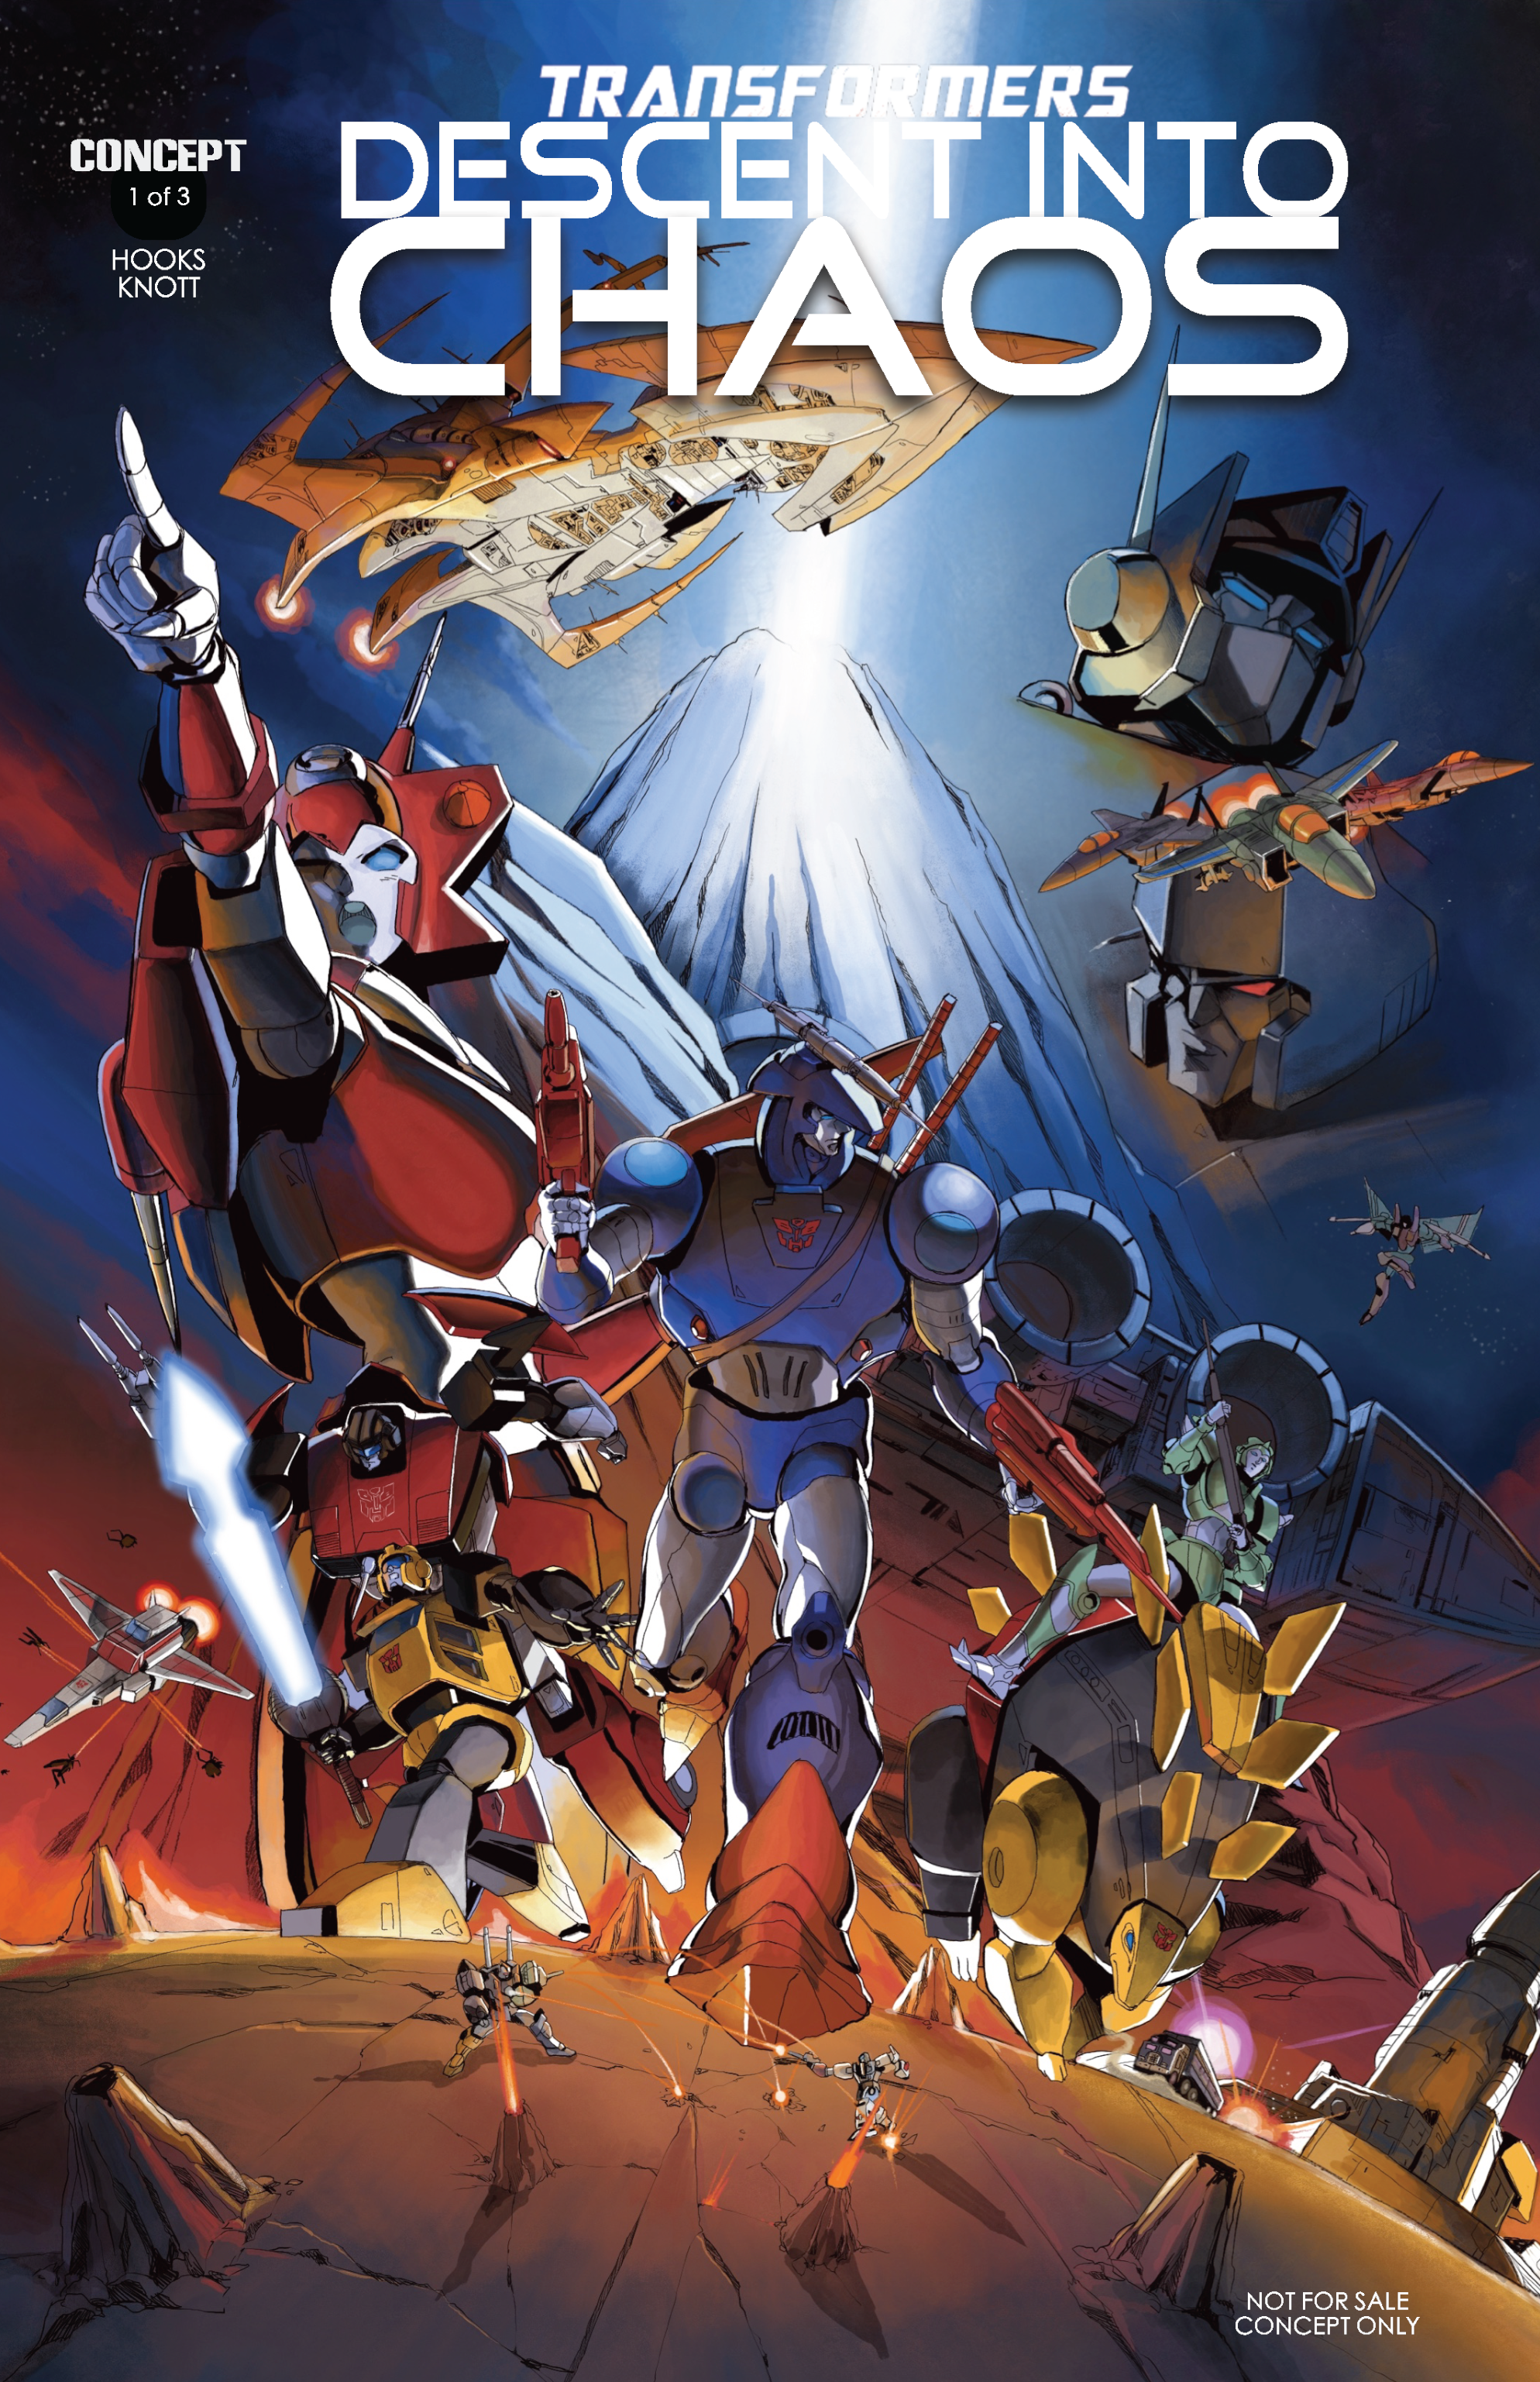 Transformers: Descent Into Chaos #1